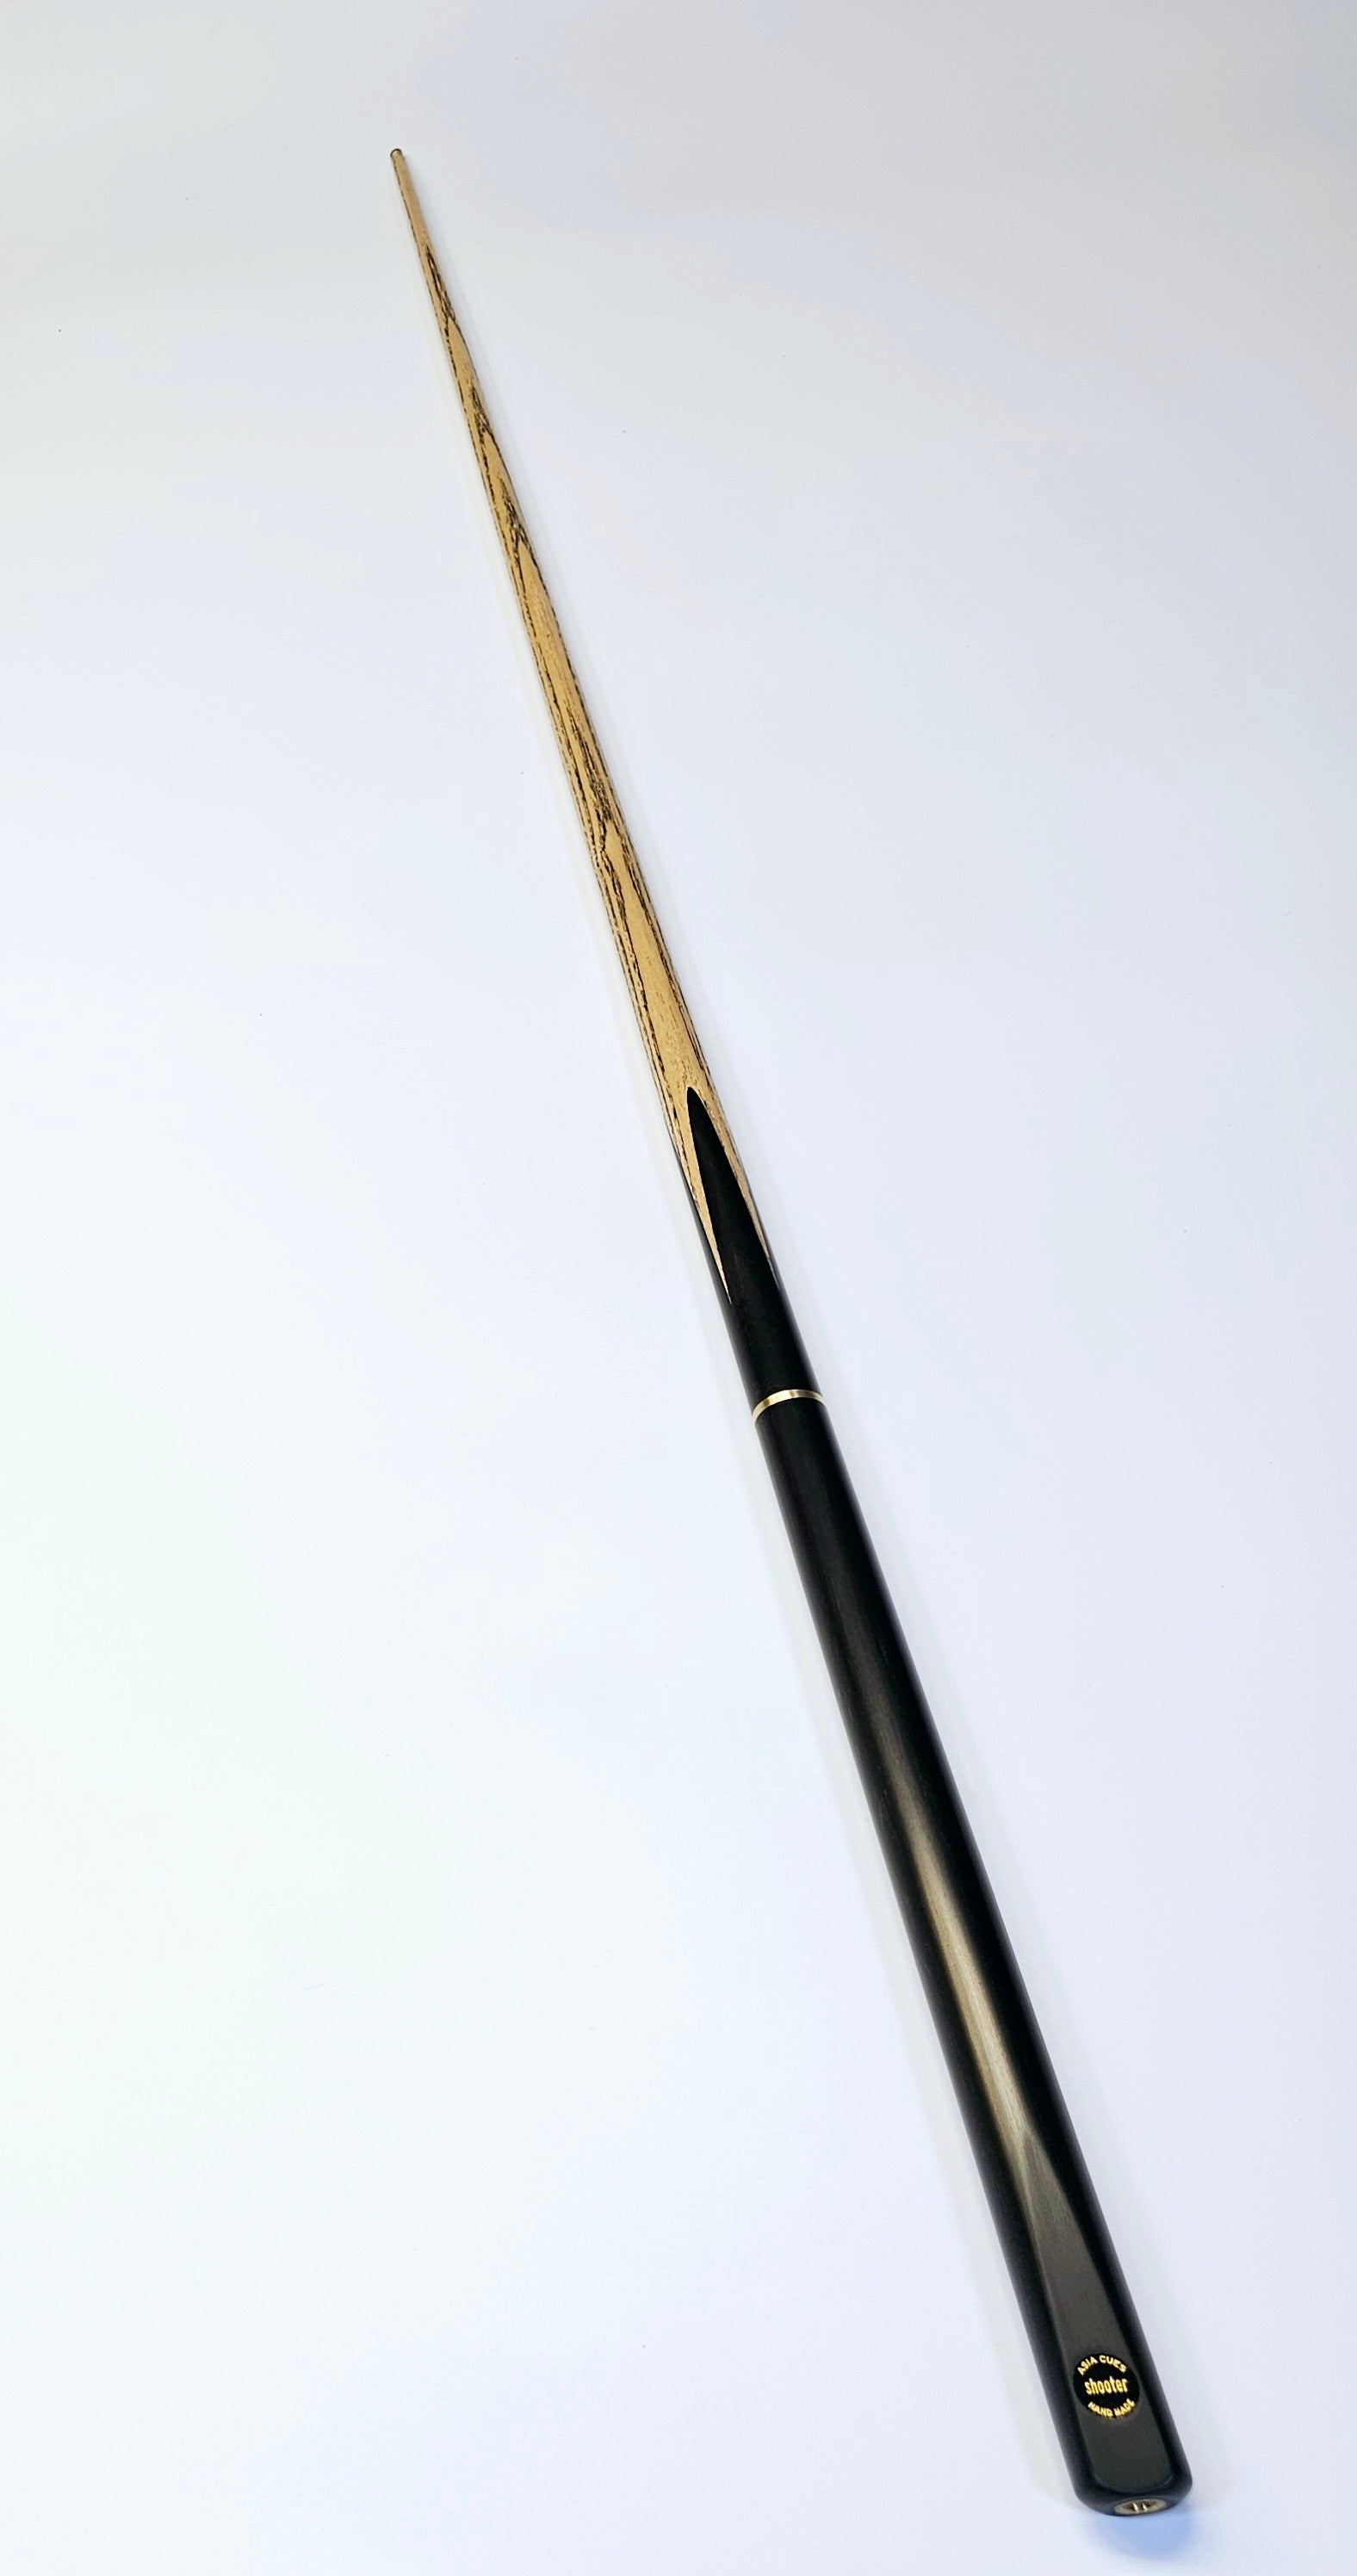 Asia Cues Shooter - 3/4 Jointed Pool Cue 8.6mm Tip, 17oz, 57"